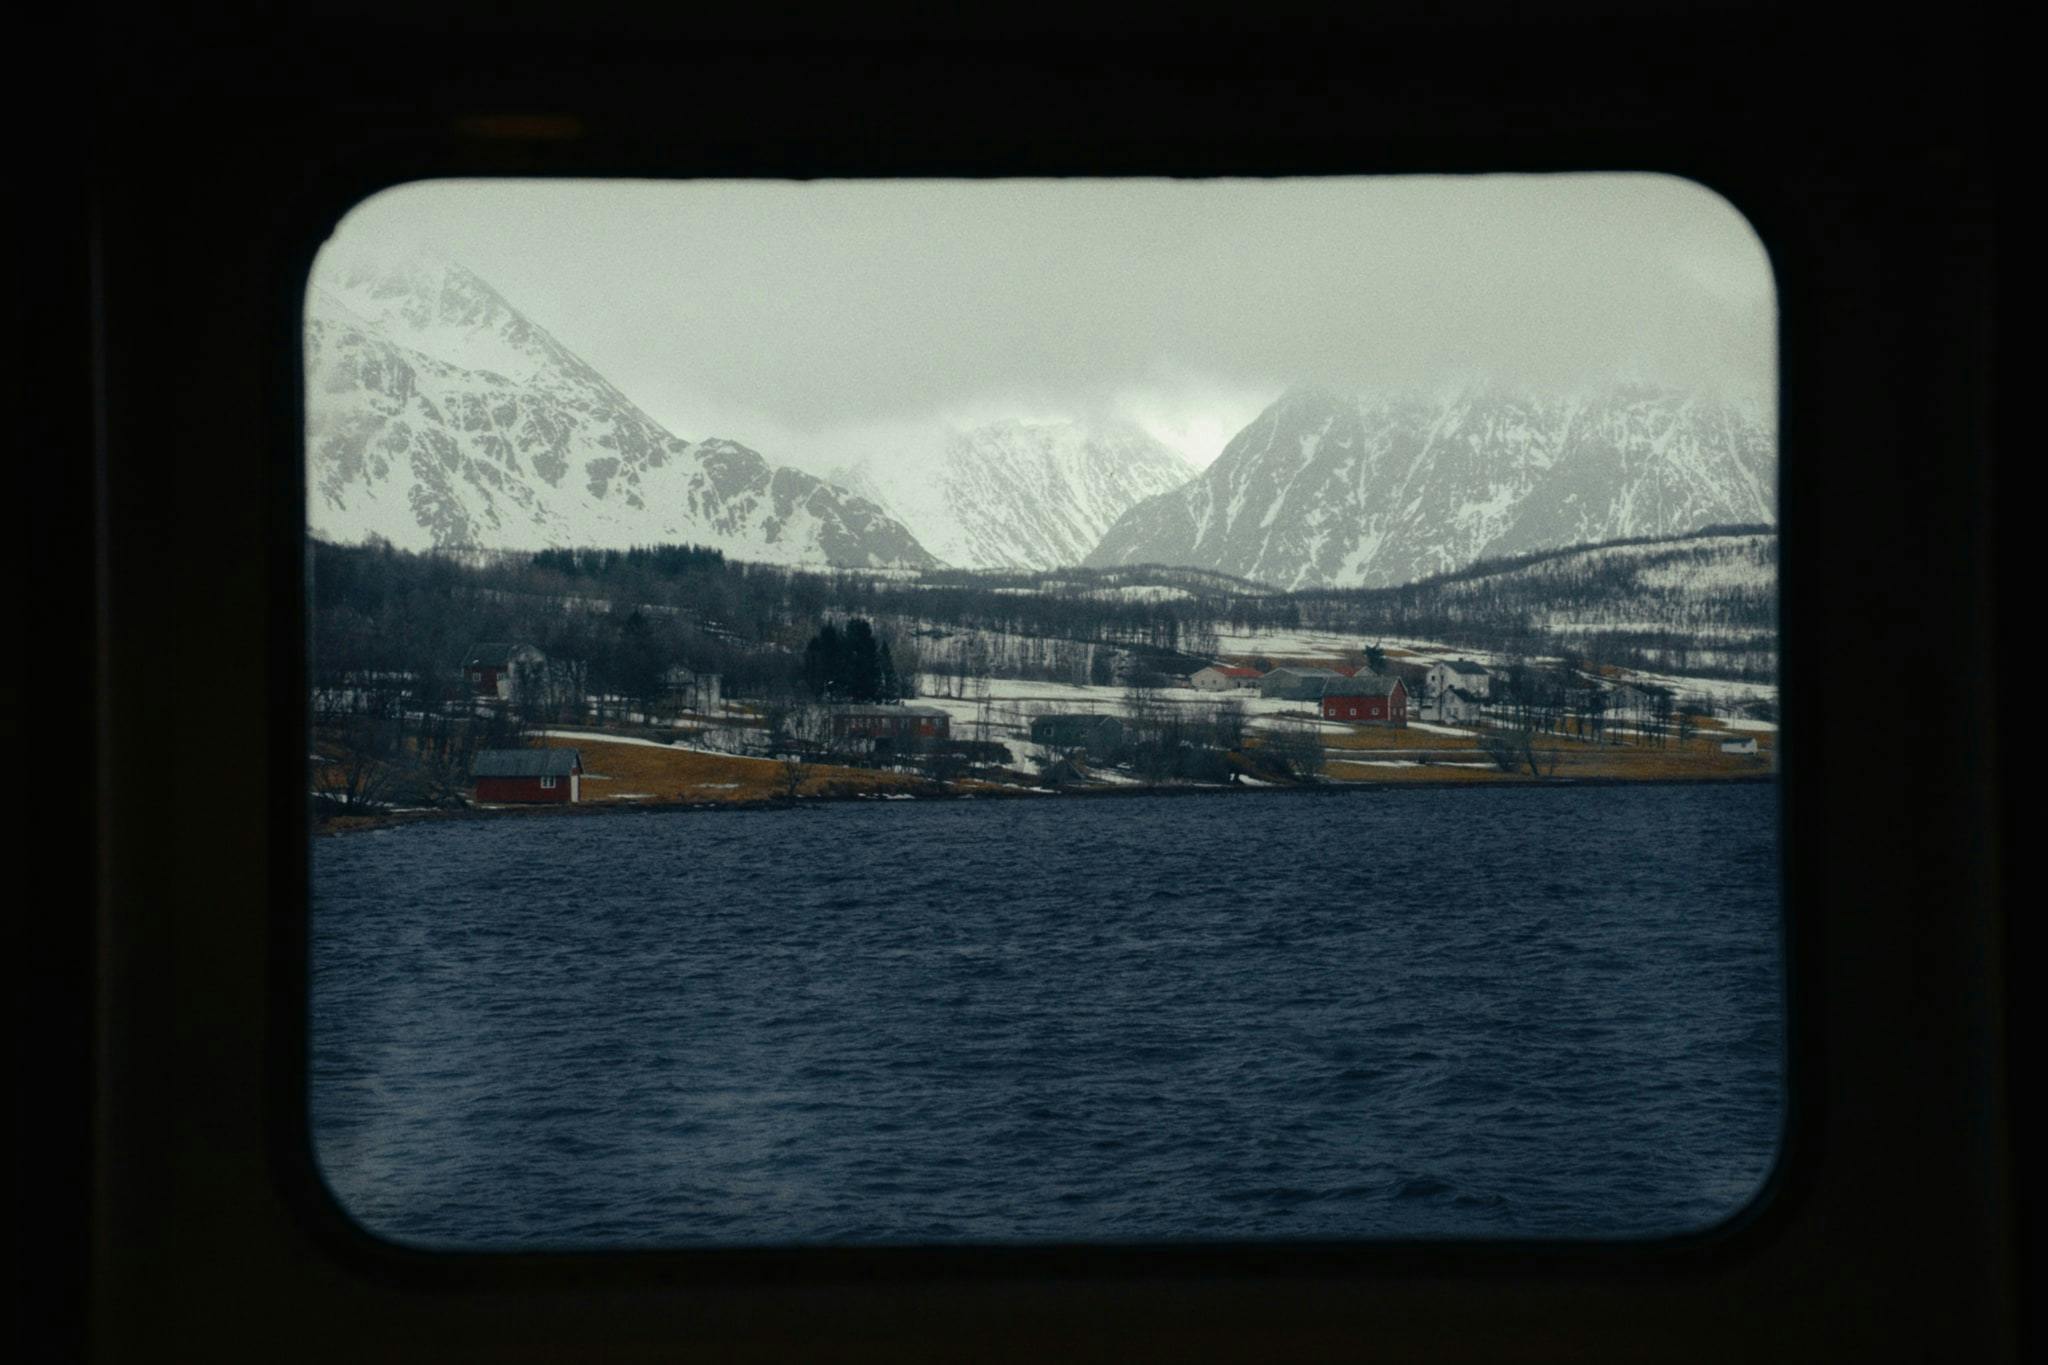 A view of mountains from the winow of a boat